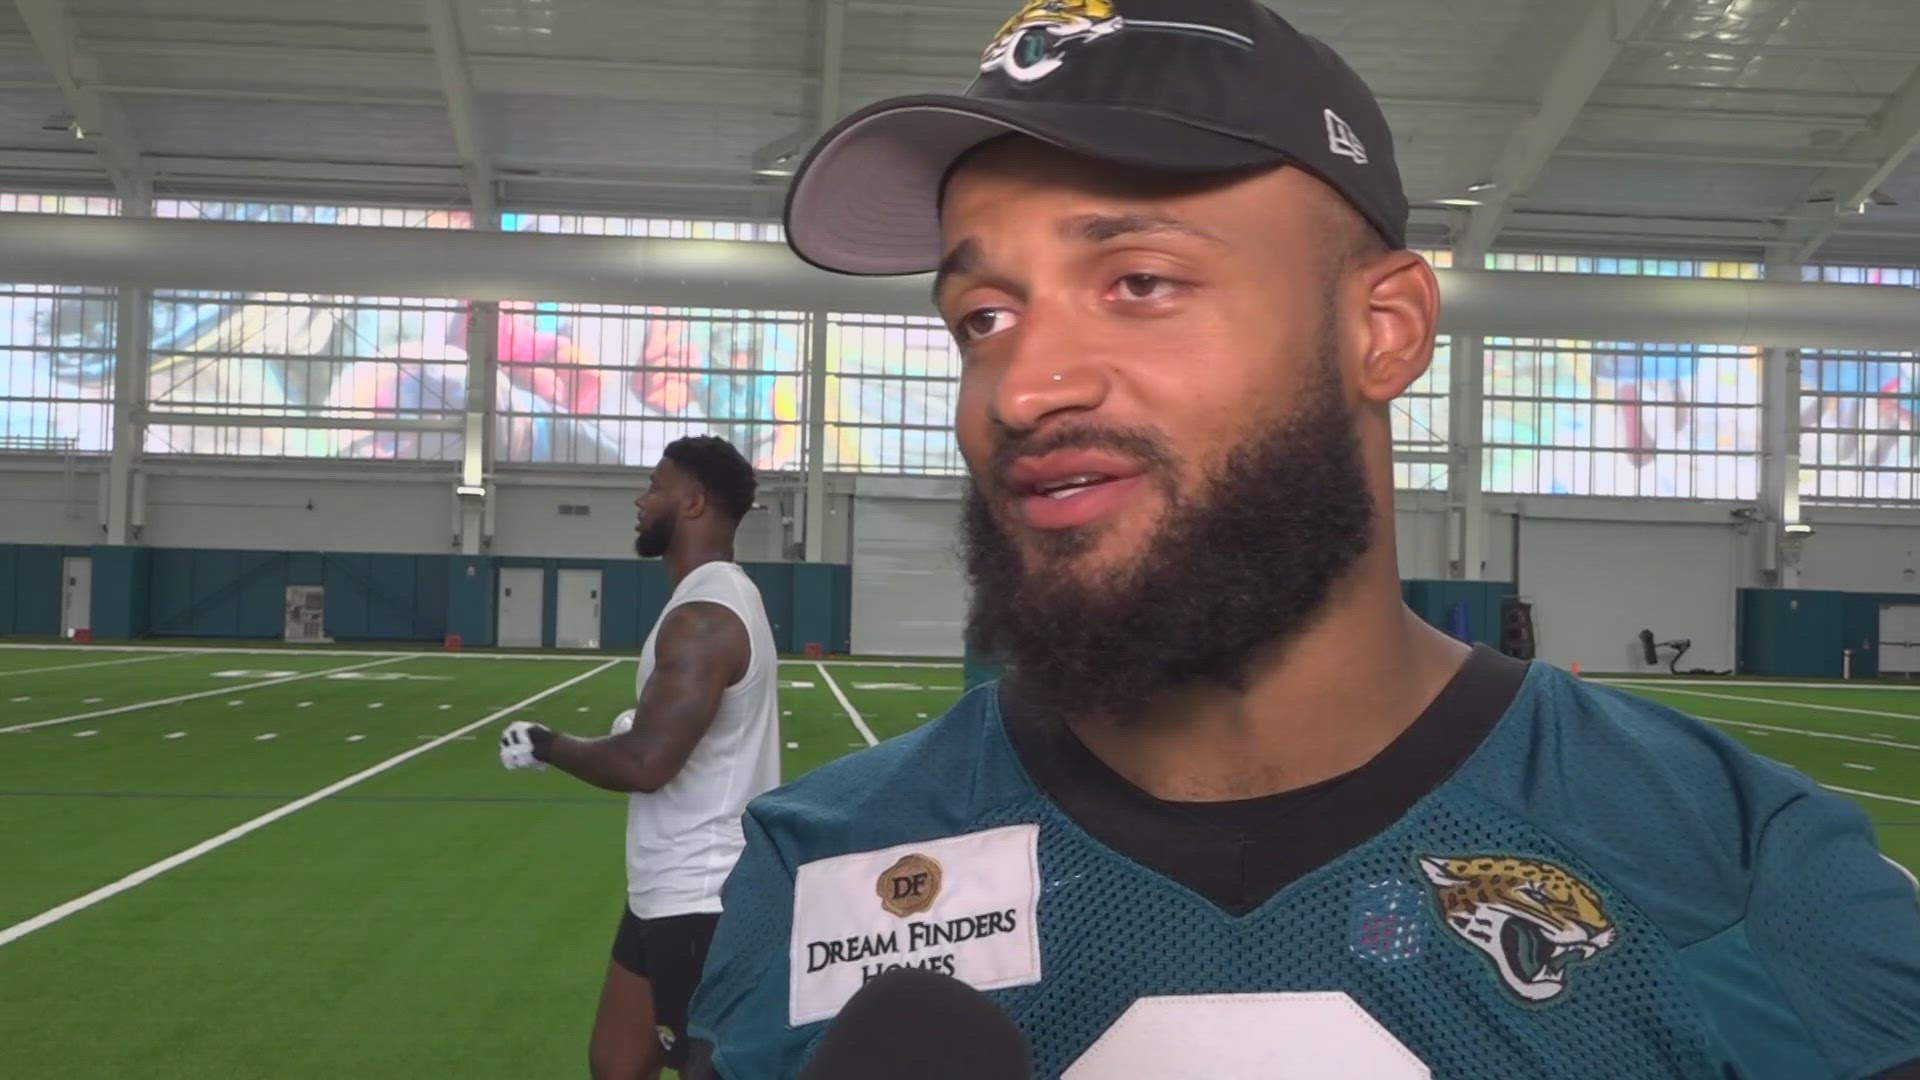 Knowing what he can provide for the Jaguars, he says it's important to hit the ground running on building a connection with his team.